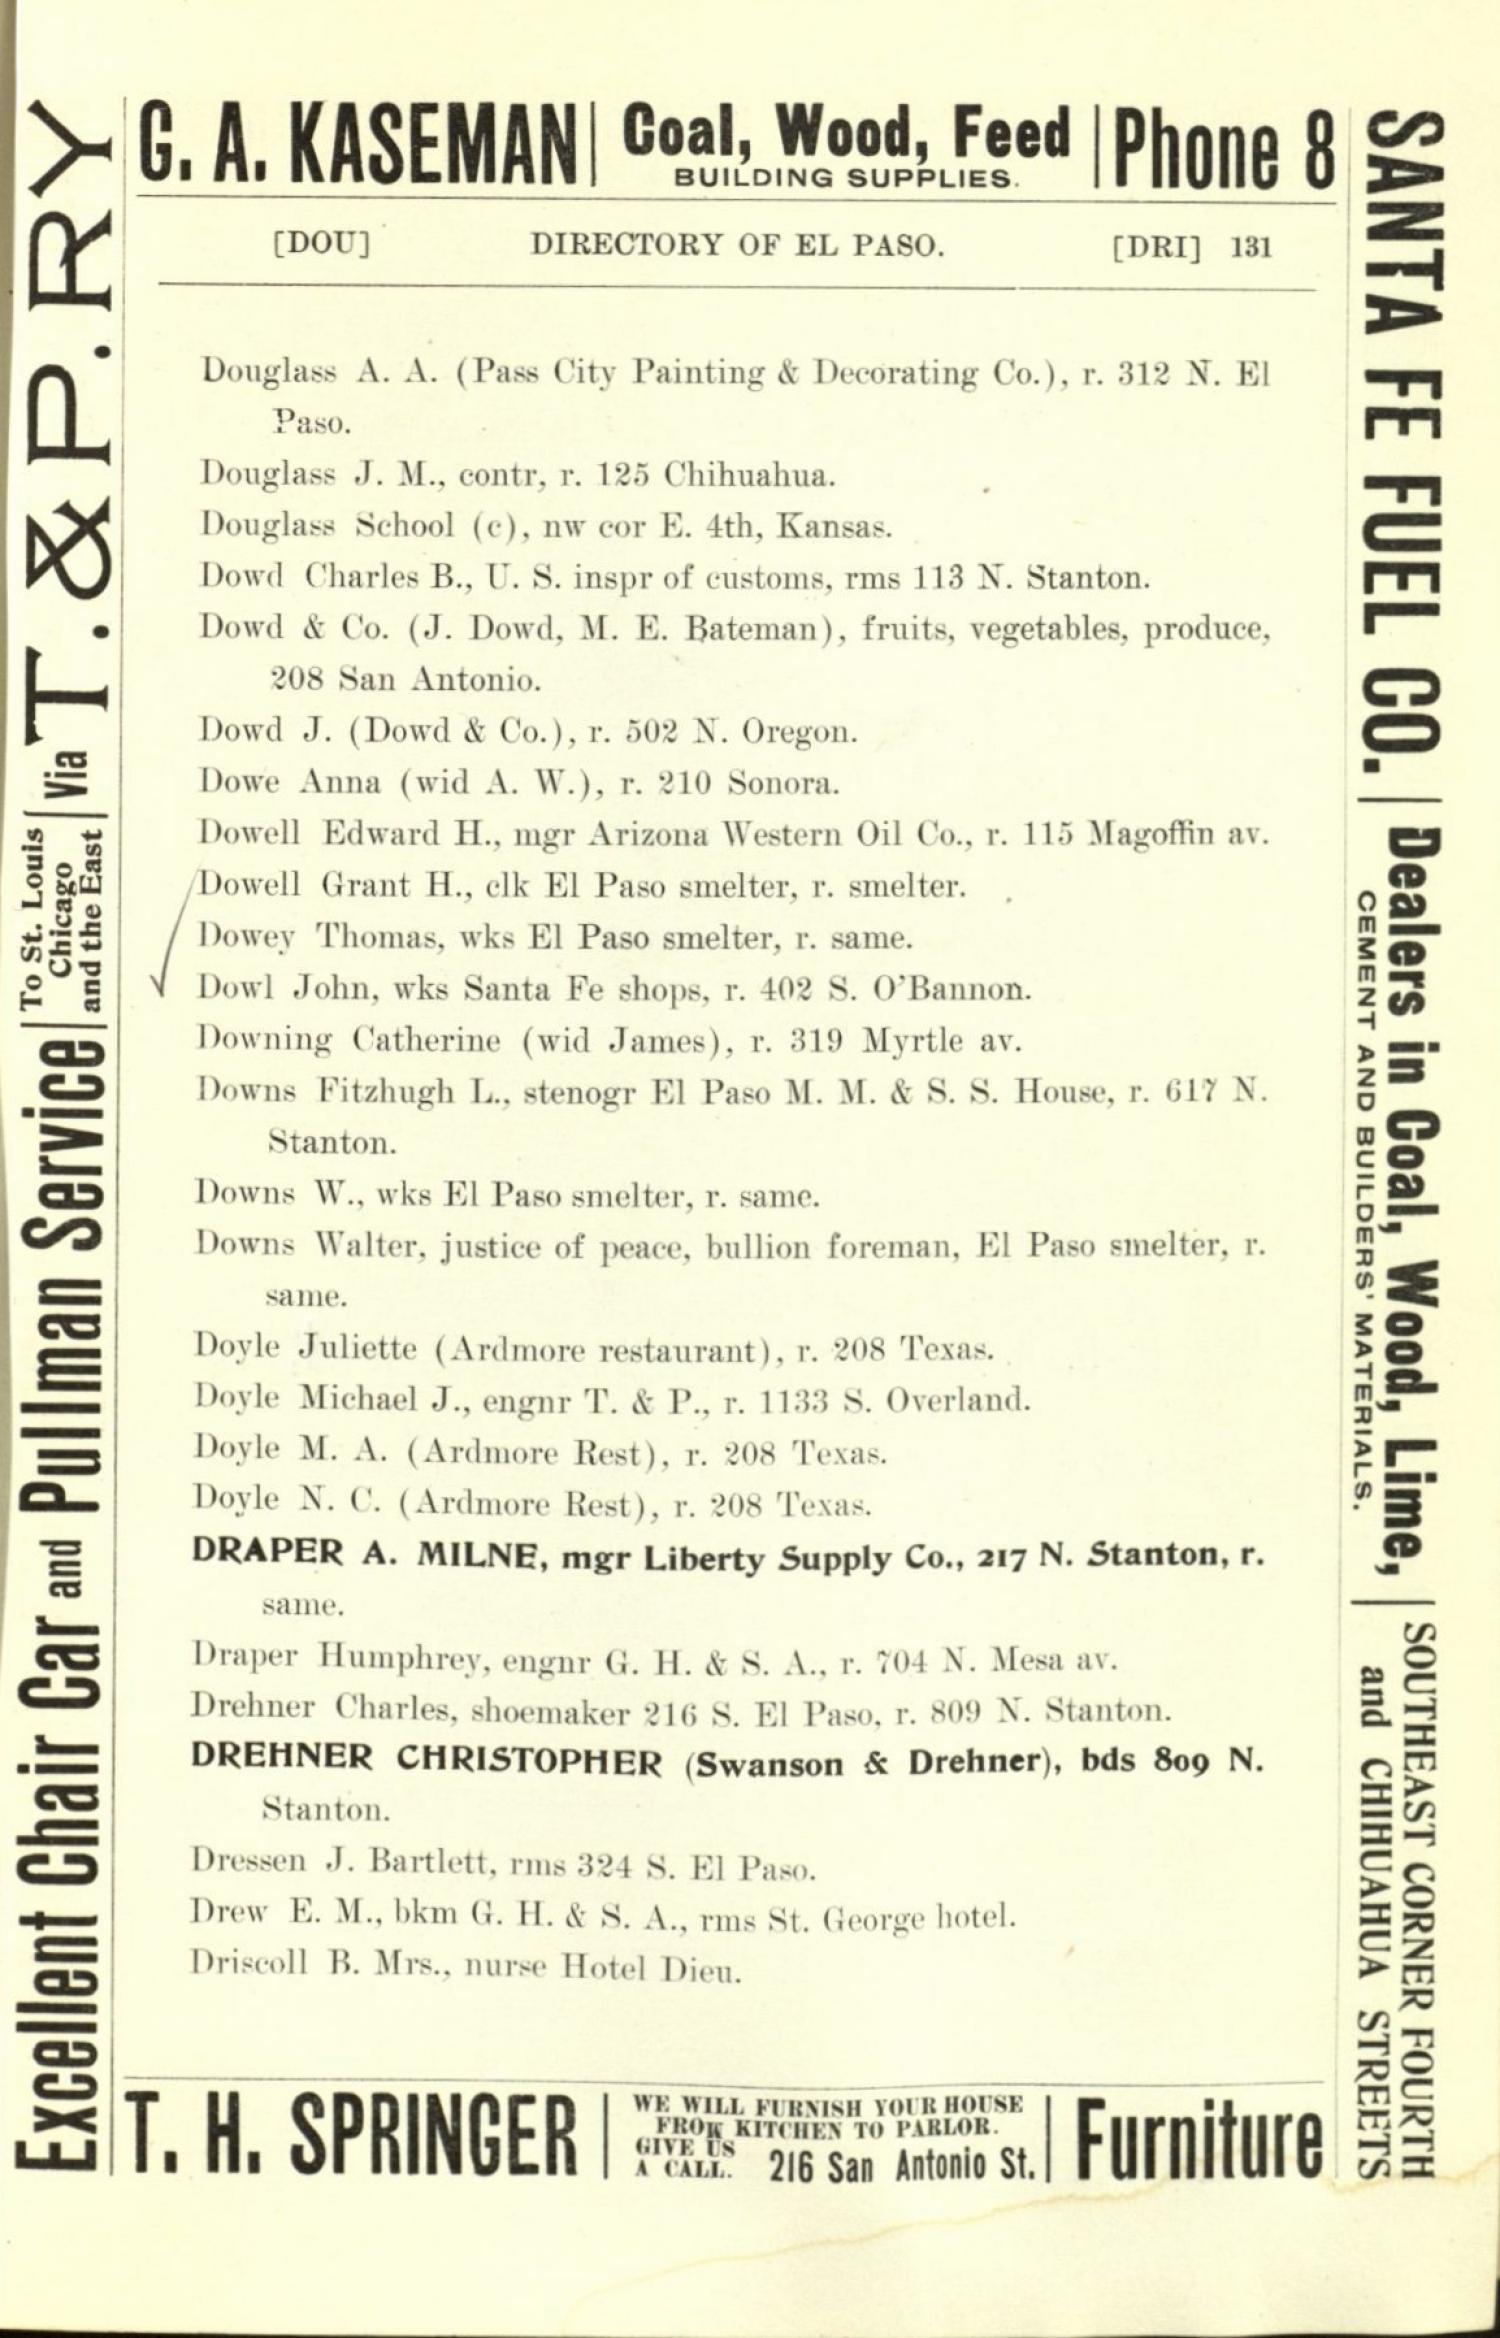 Worley's Directory of the City of El Paso, Texas 1901
                                                
                                                    131
                                                